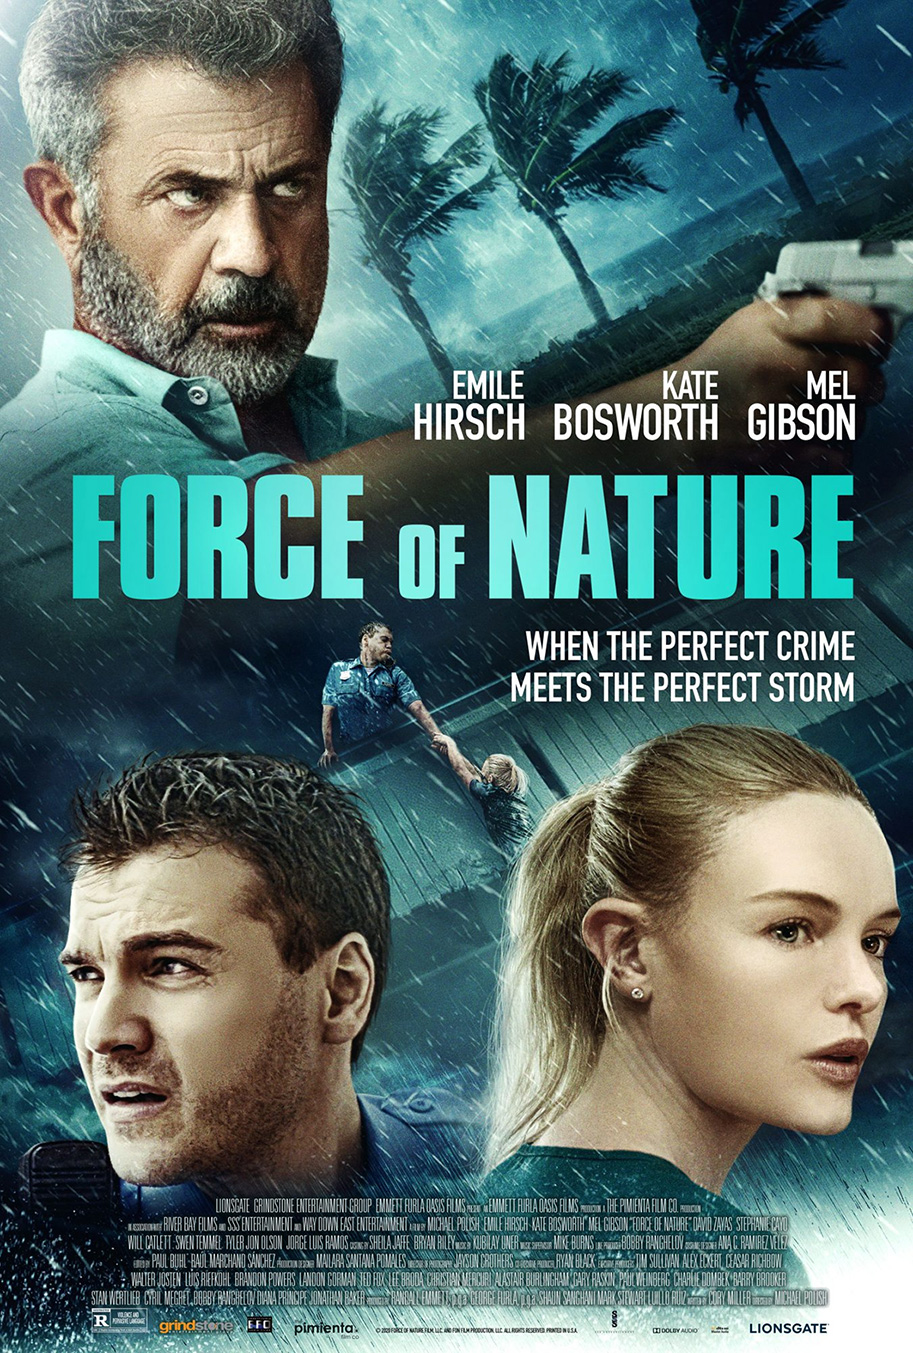 Force of Nature, Mel Gibson, poster